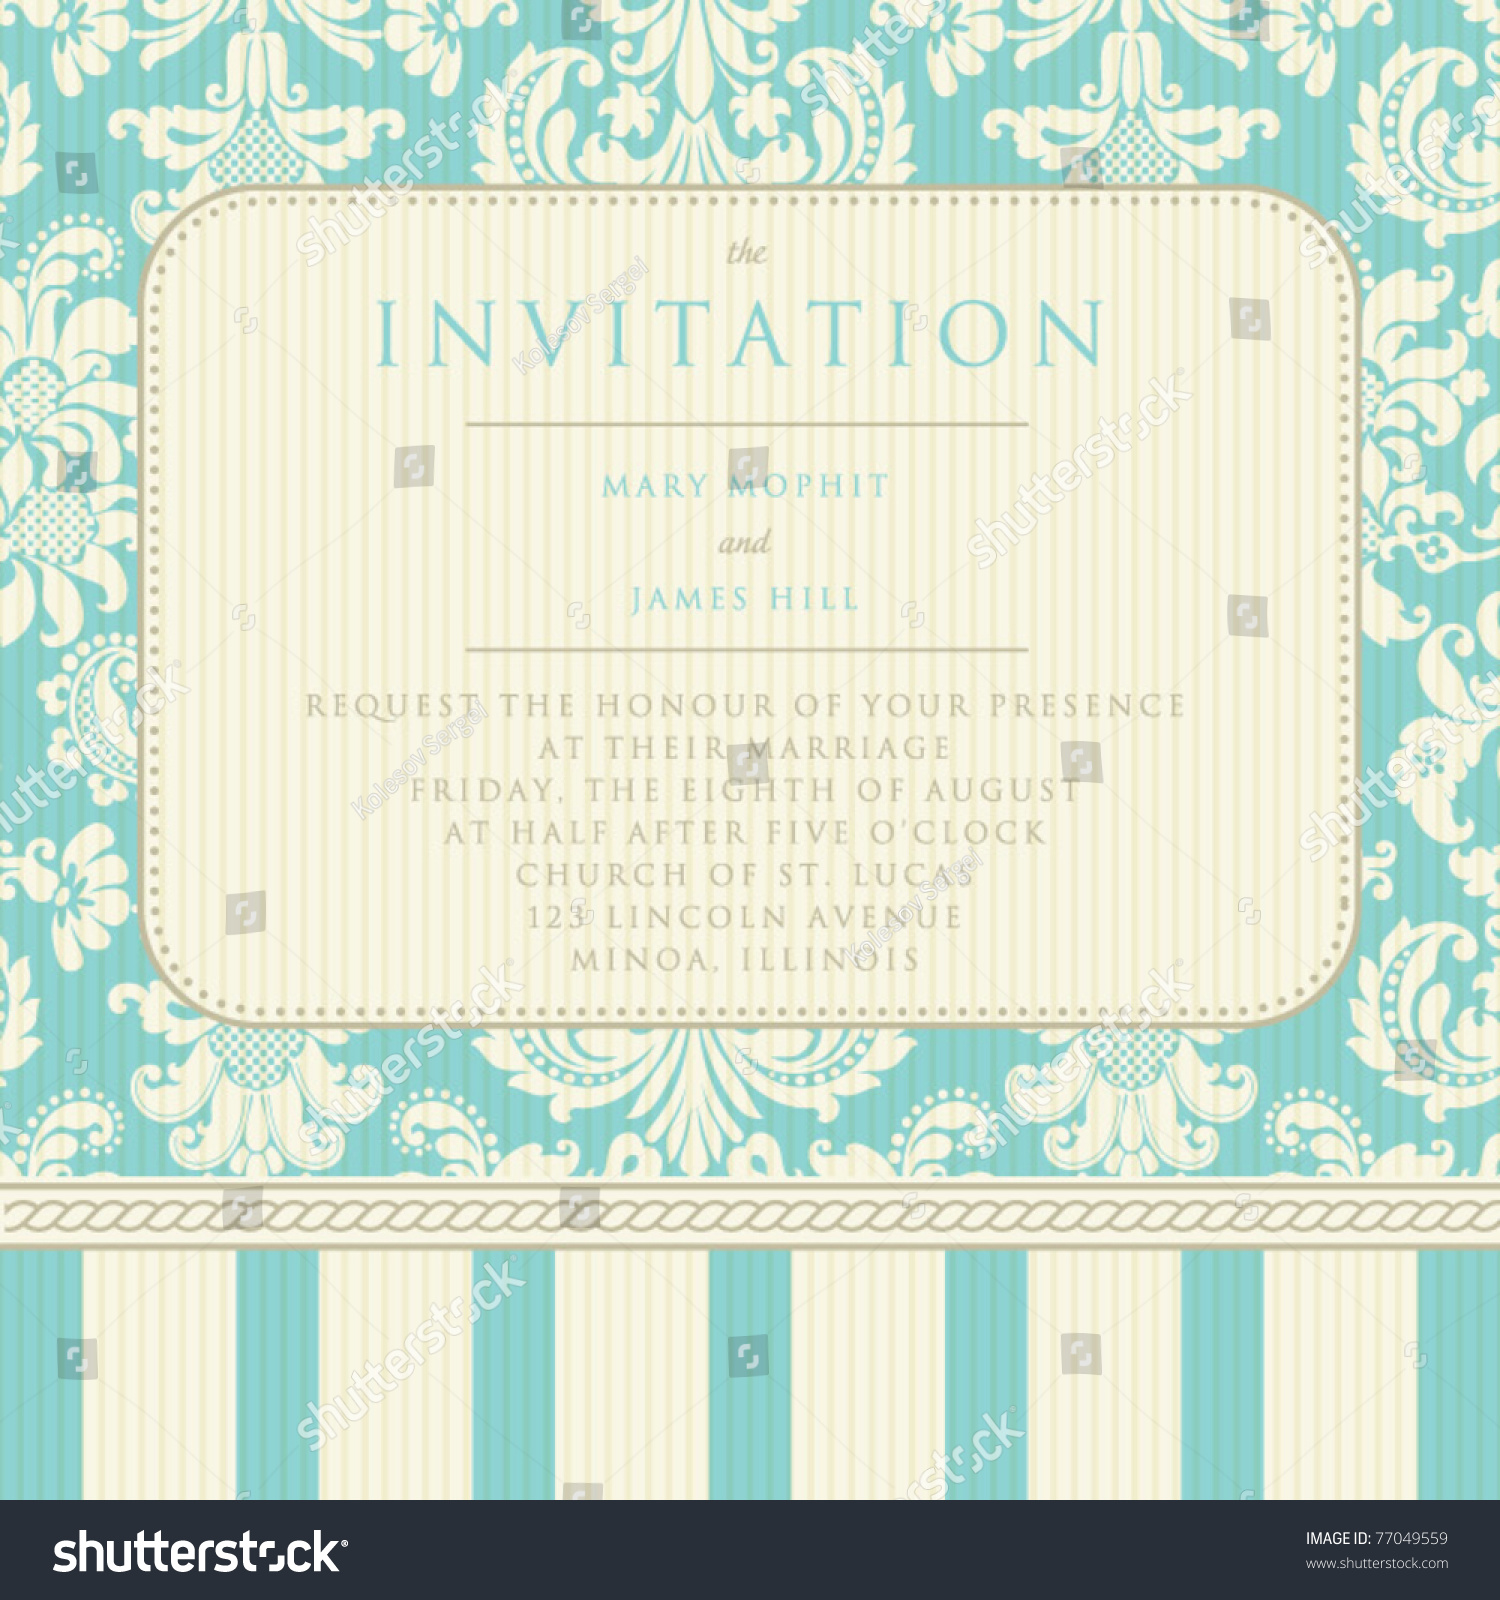 Ornate damask background. Invitation to the wedding or announcements #77049559